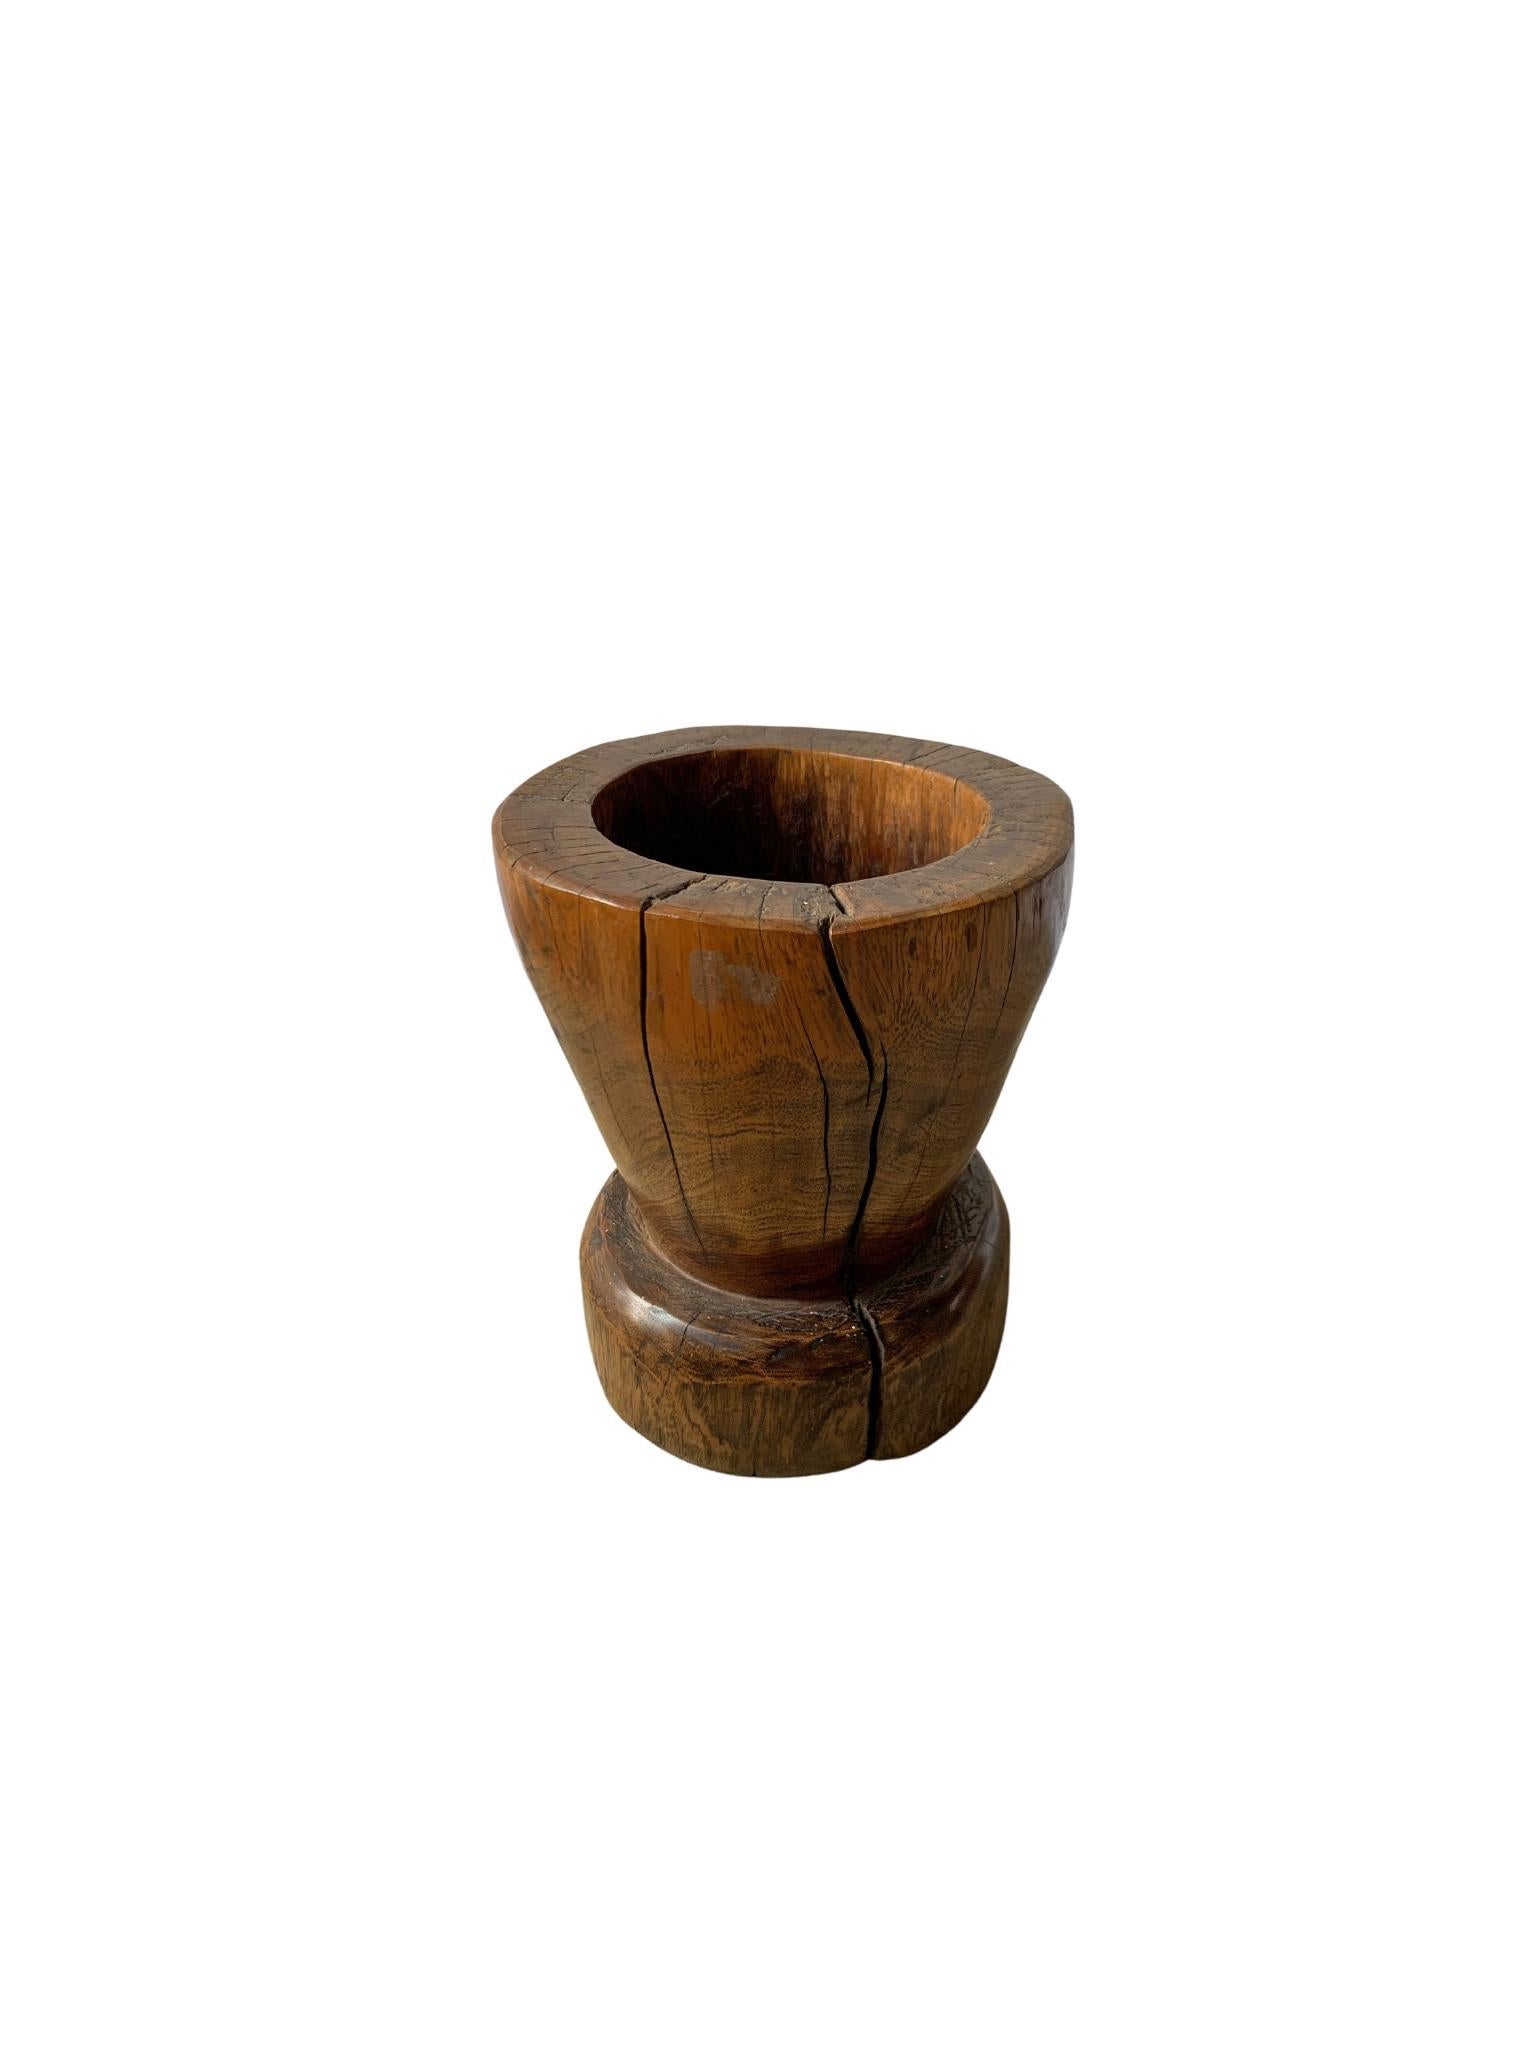 Hand-Crafted Solid Teak Mortar from Java, Indonesia, C. 1900 For Sale